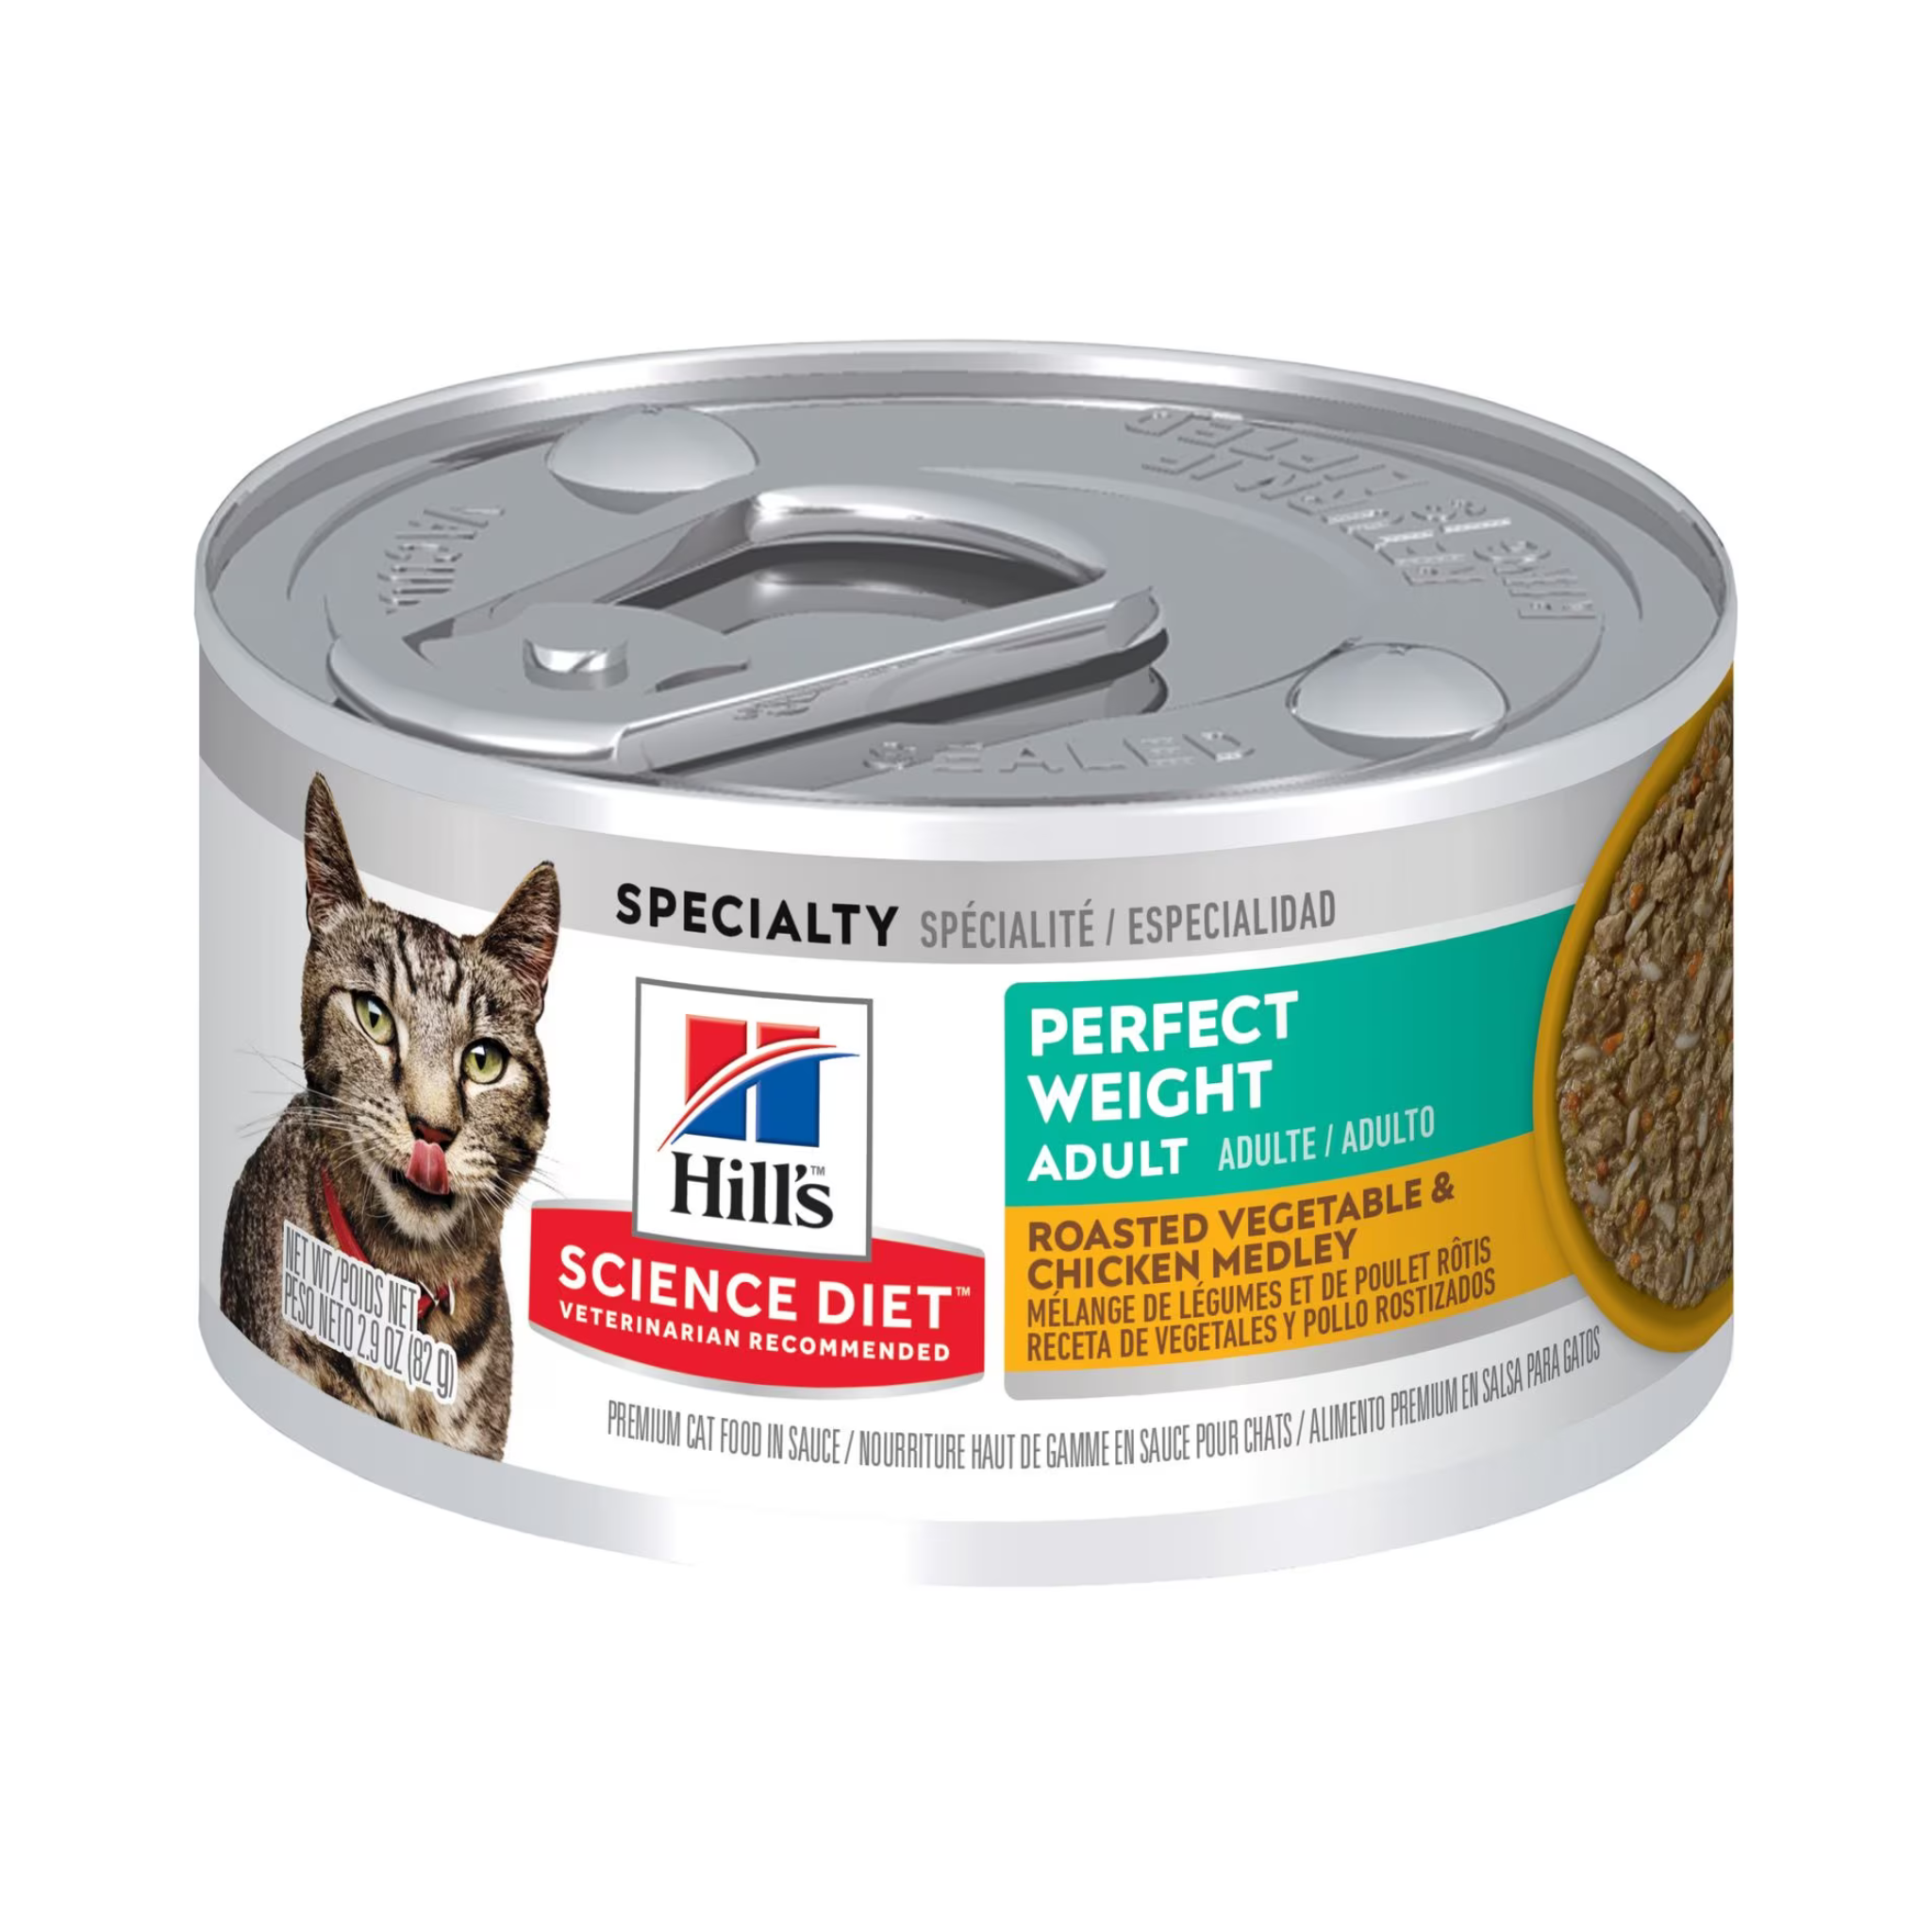 Hill's Science Diet Perfect Weight Roasted Vegetable & Chicken Medley Adult Cat Canned